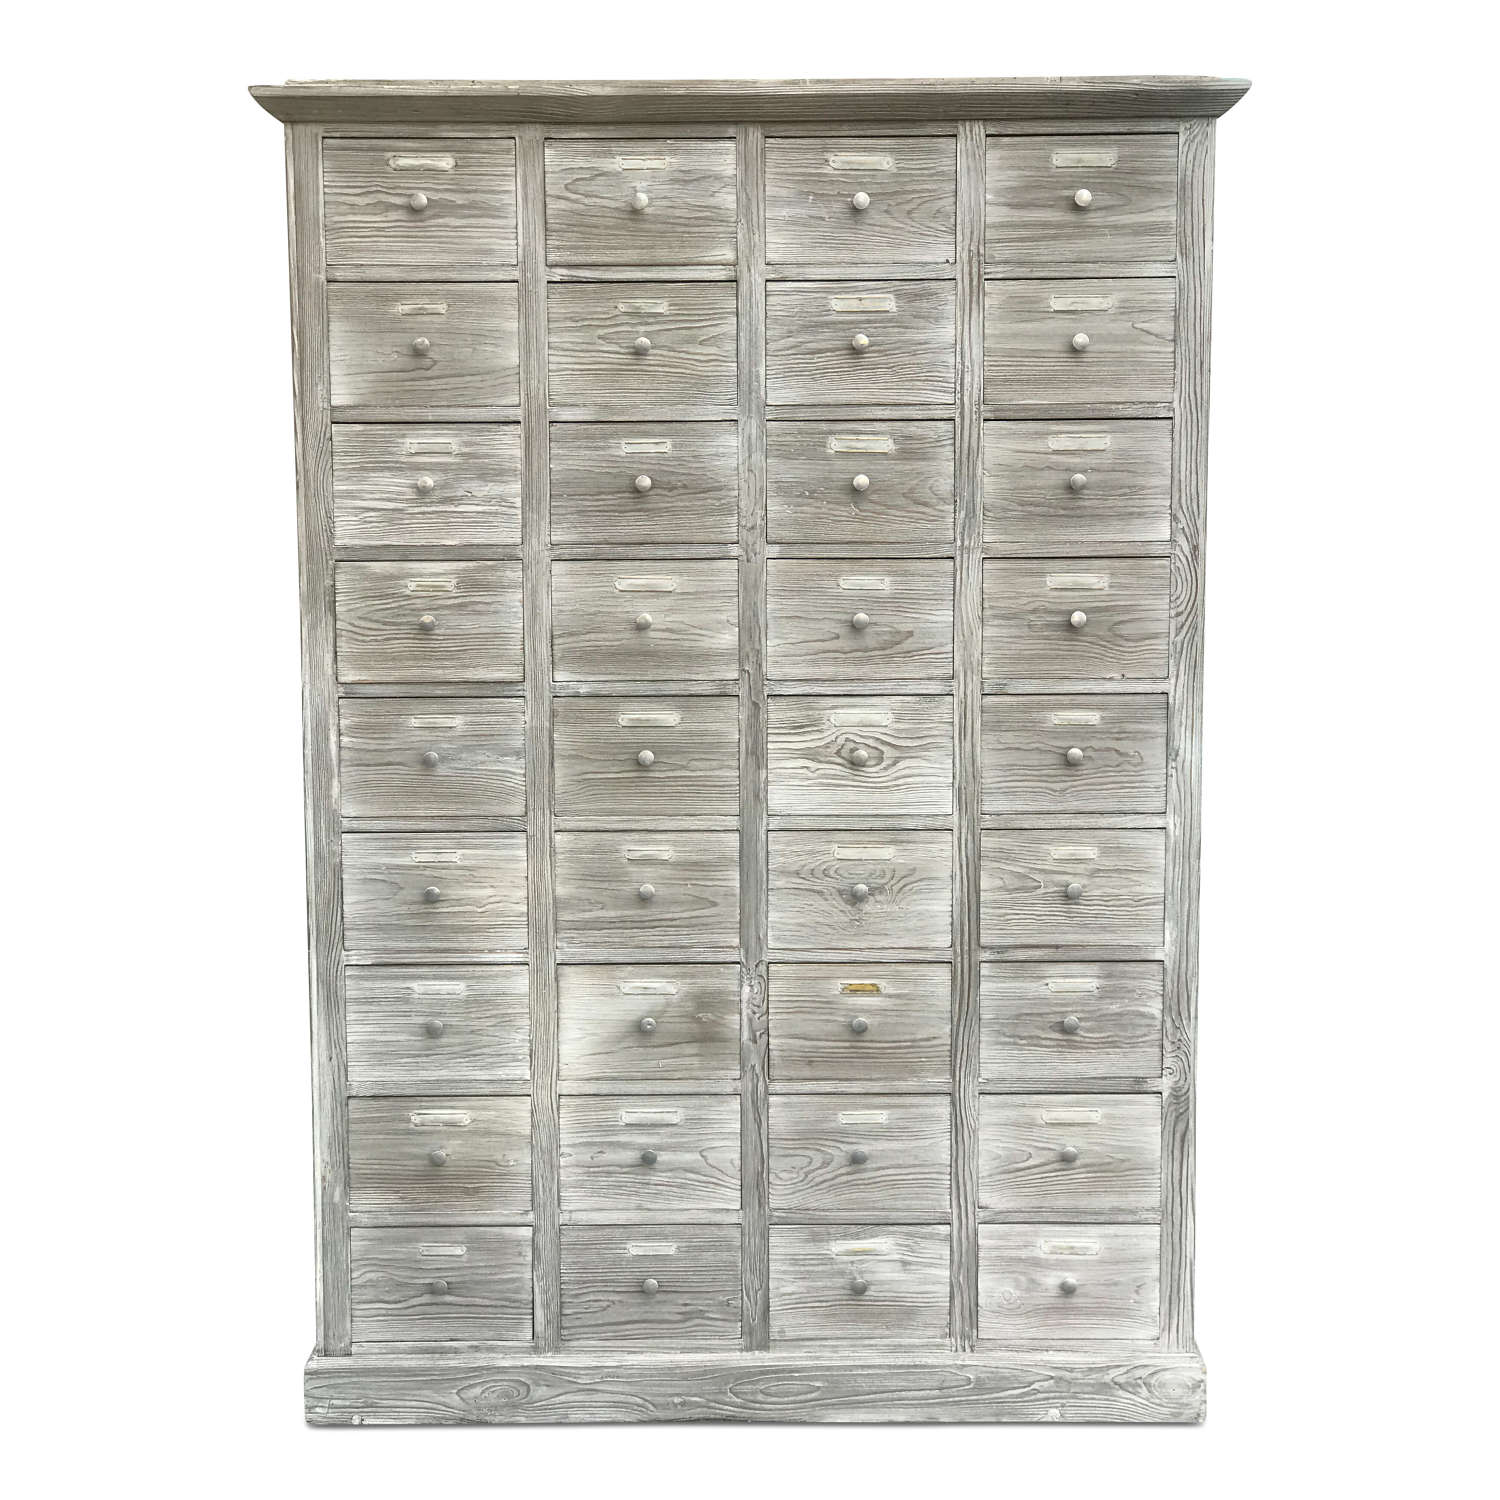 Large 20th Century Bank of Drawers